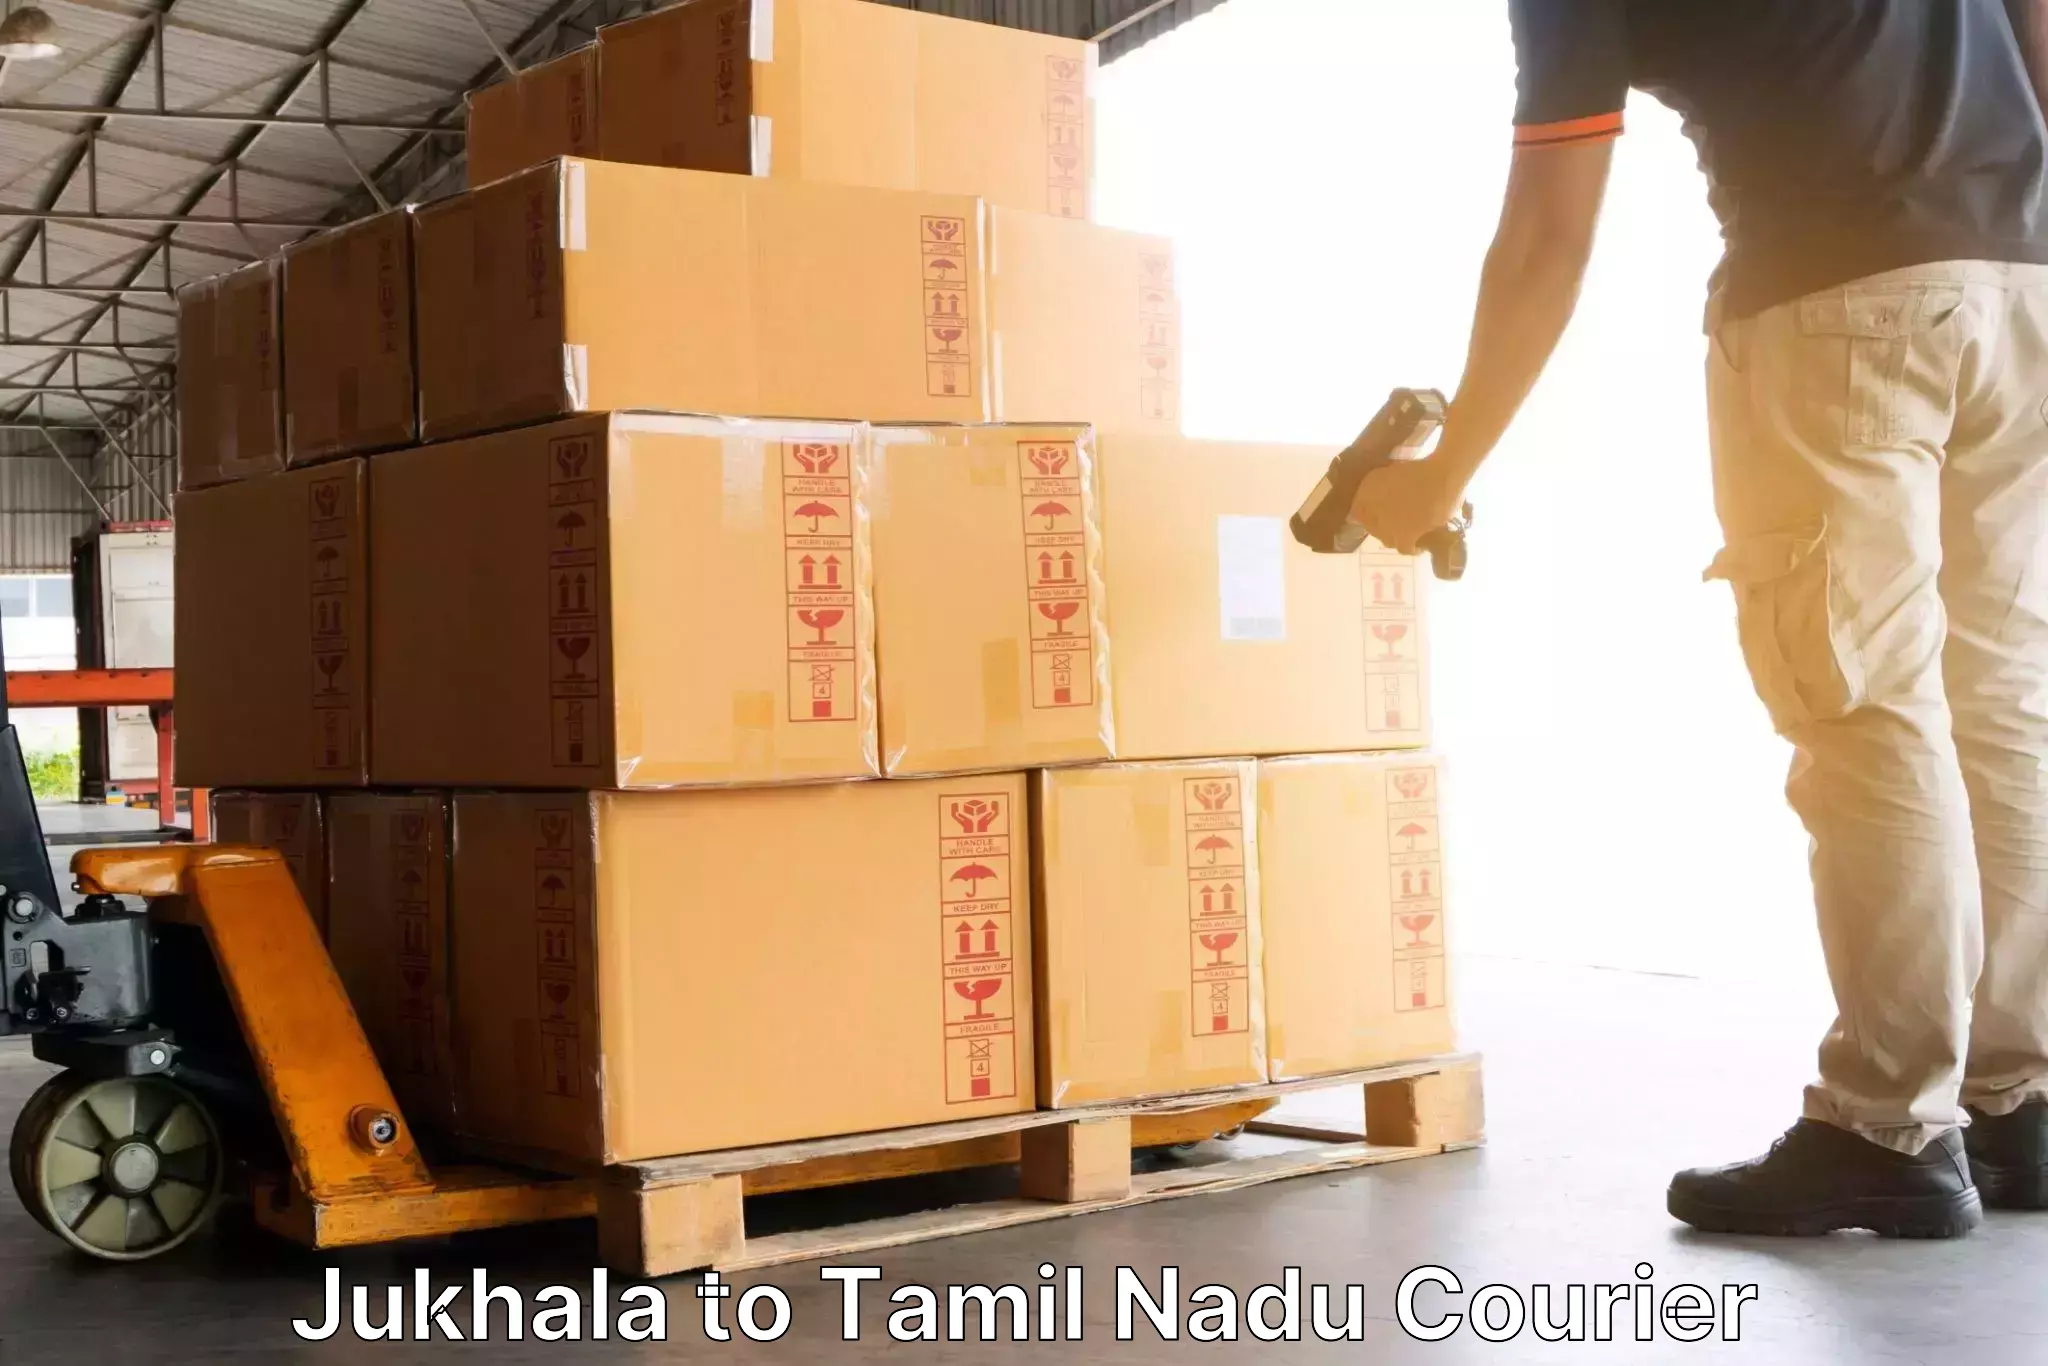 Express package services Jukhala to Ennore Port Chennai